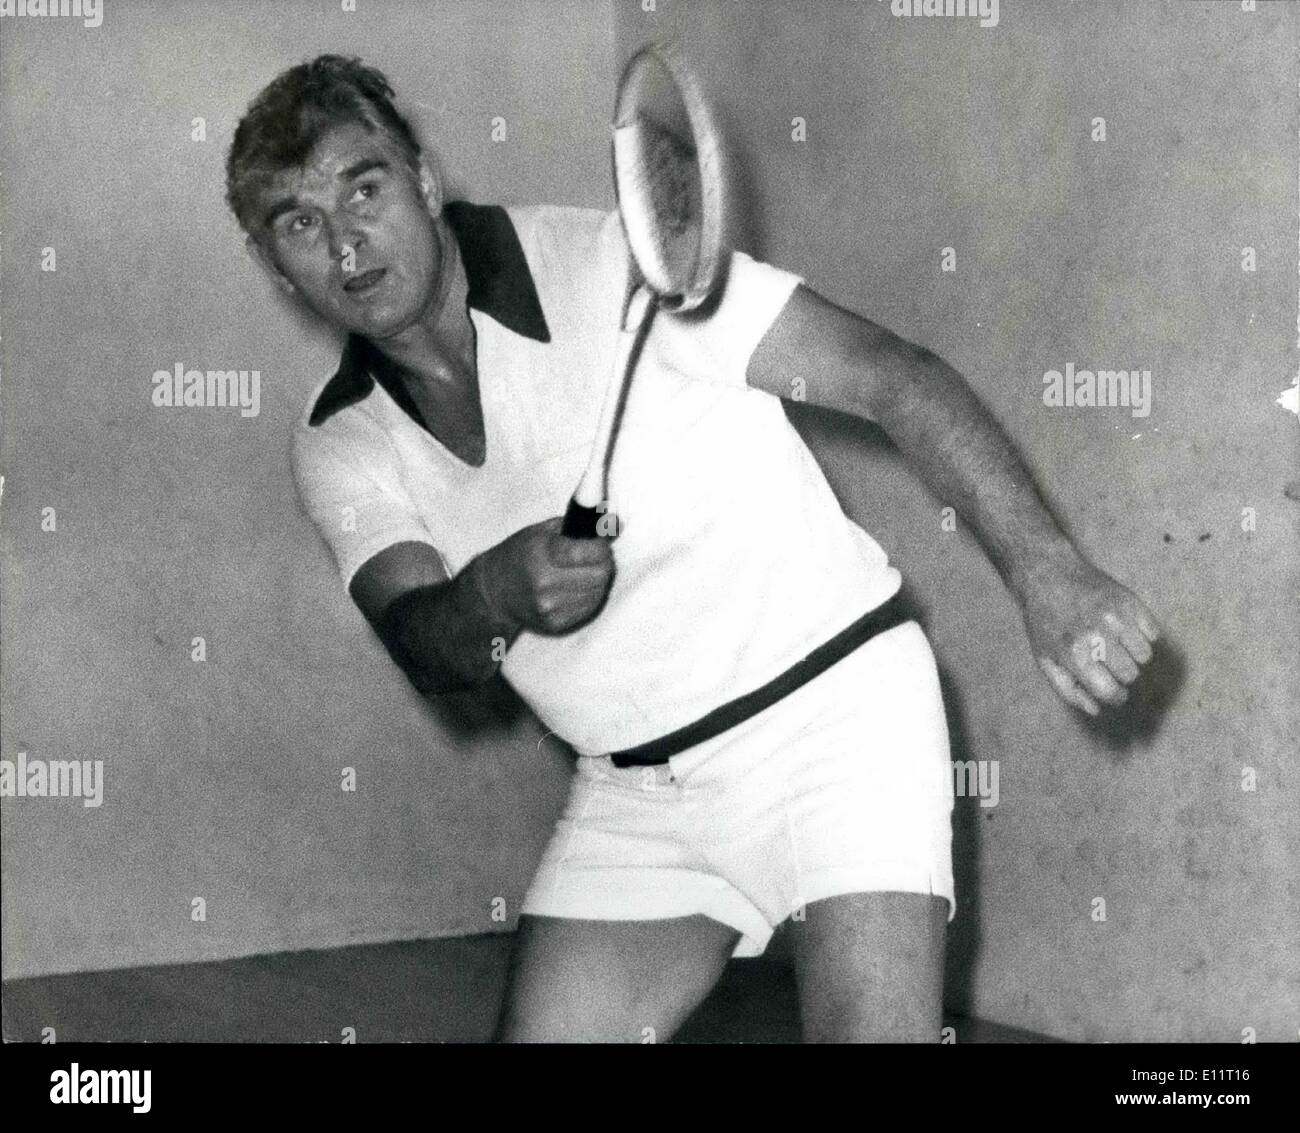 Feb. 02, 1980 - STEEL UNION BOSS BILL KEEPS FIT PLAYING SQUASH MR BILL SIRS, the General Secretary of the Iron and Steel Trades Stock Photo